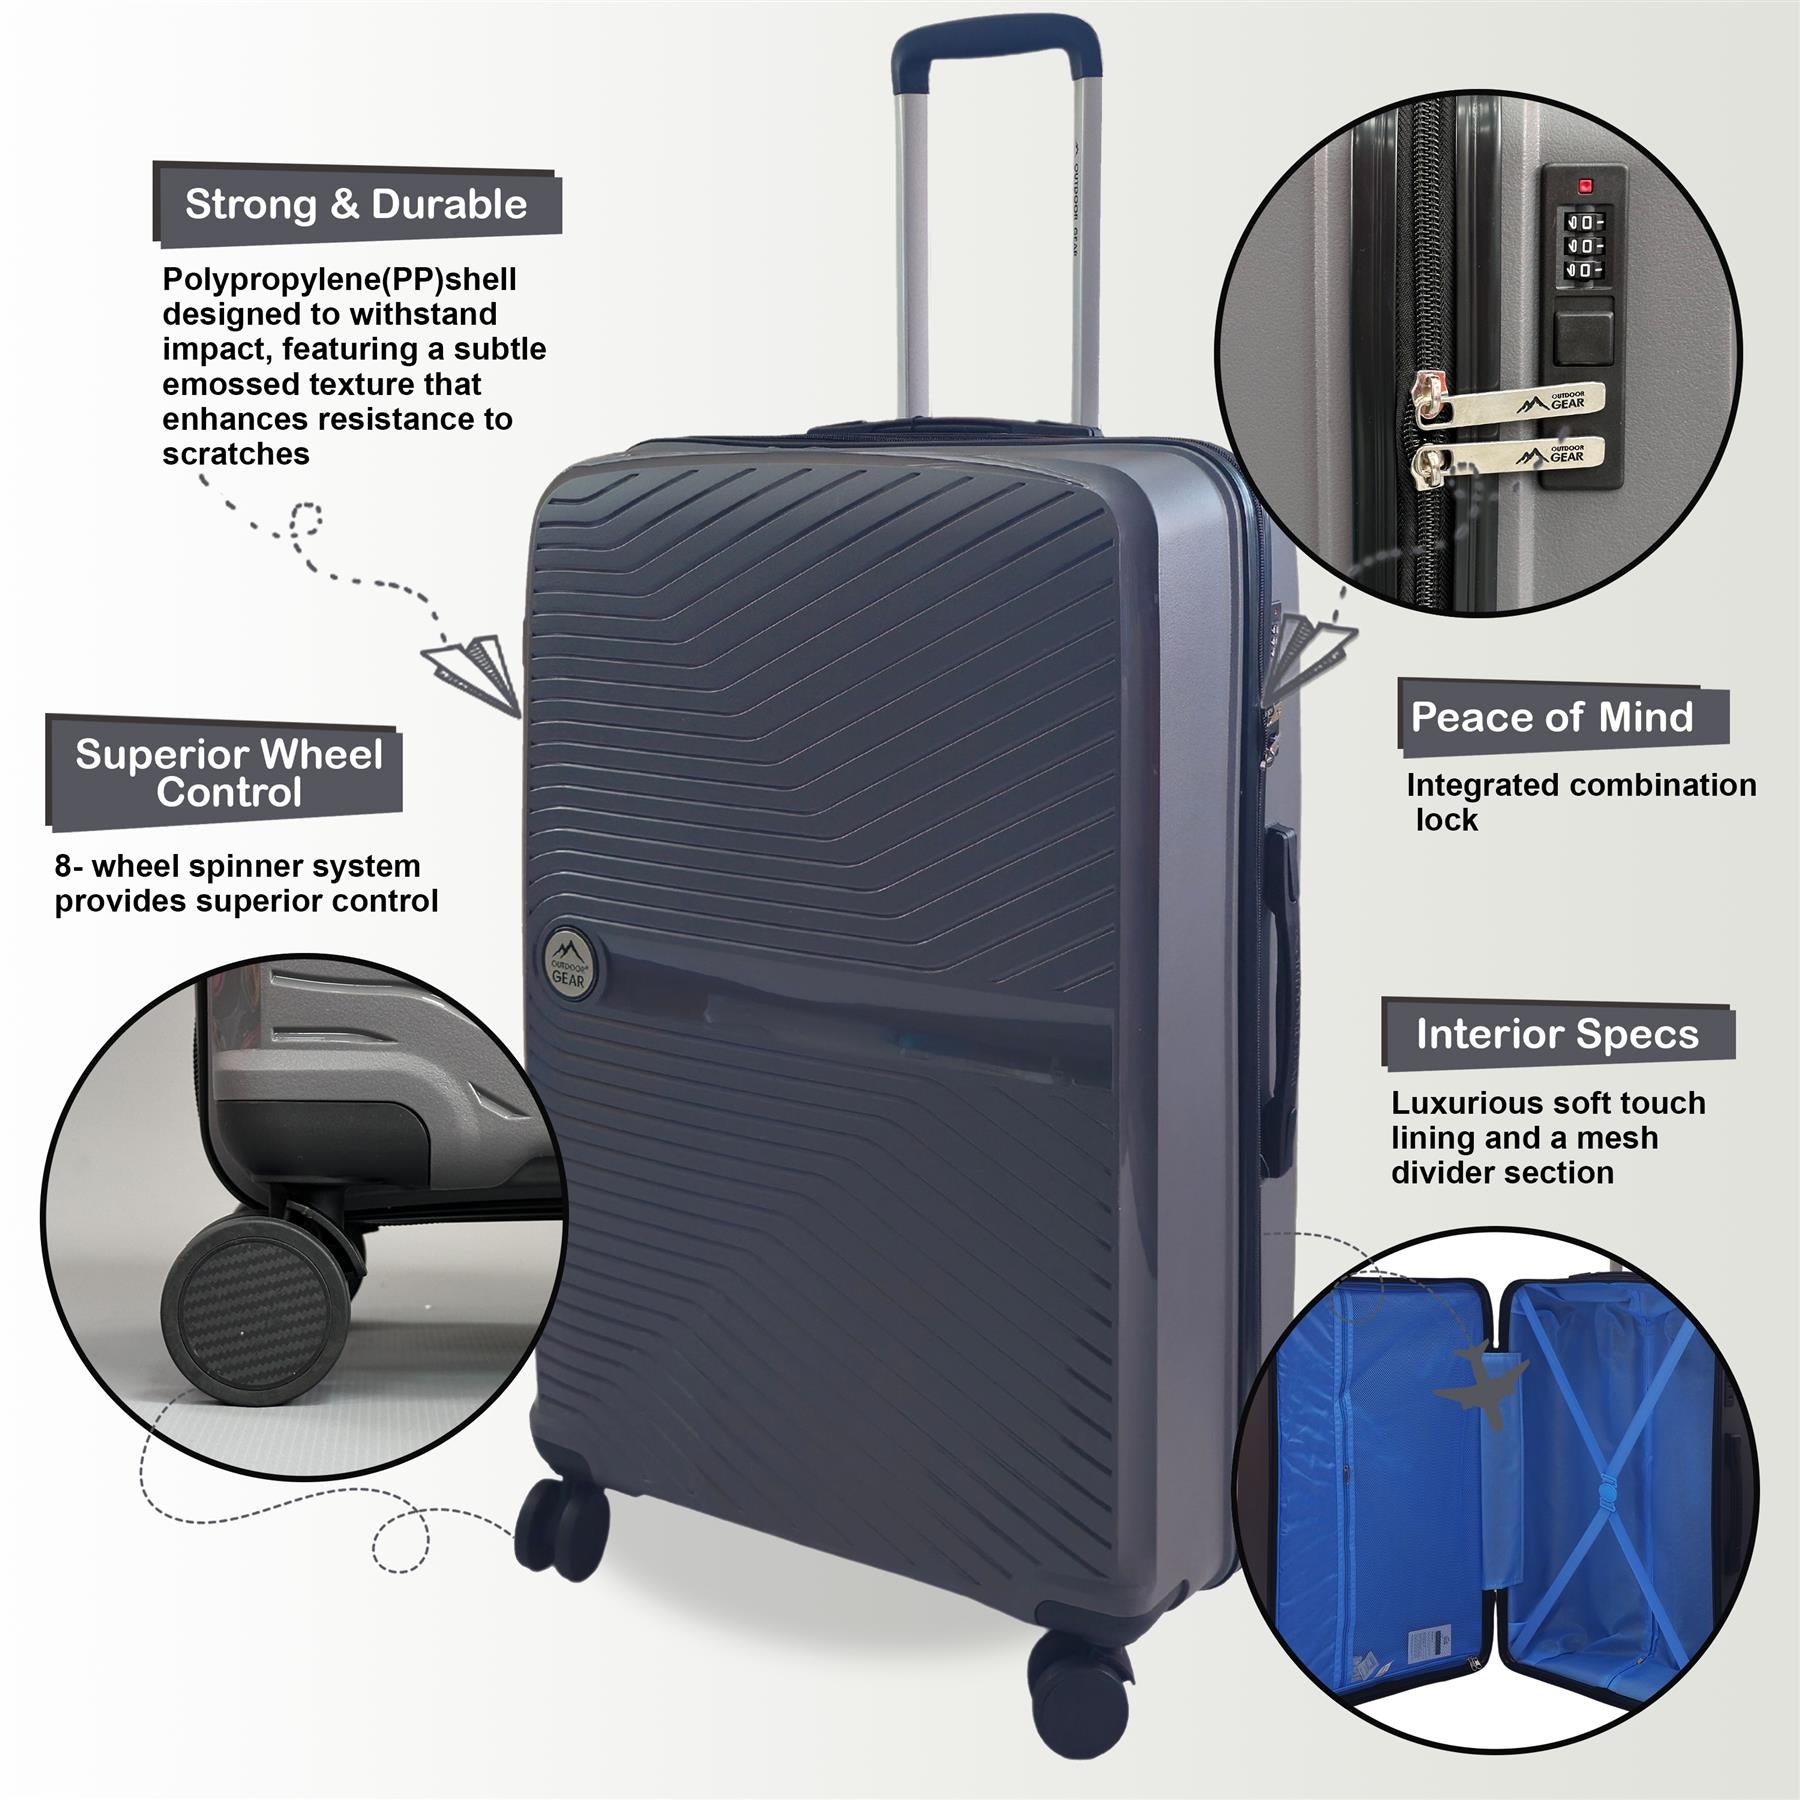 Abbeville Large Hard Shell Suitcase in Grey